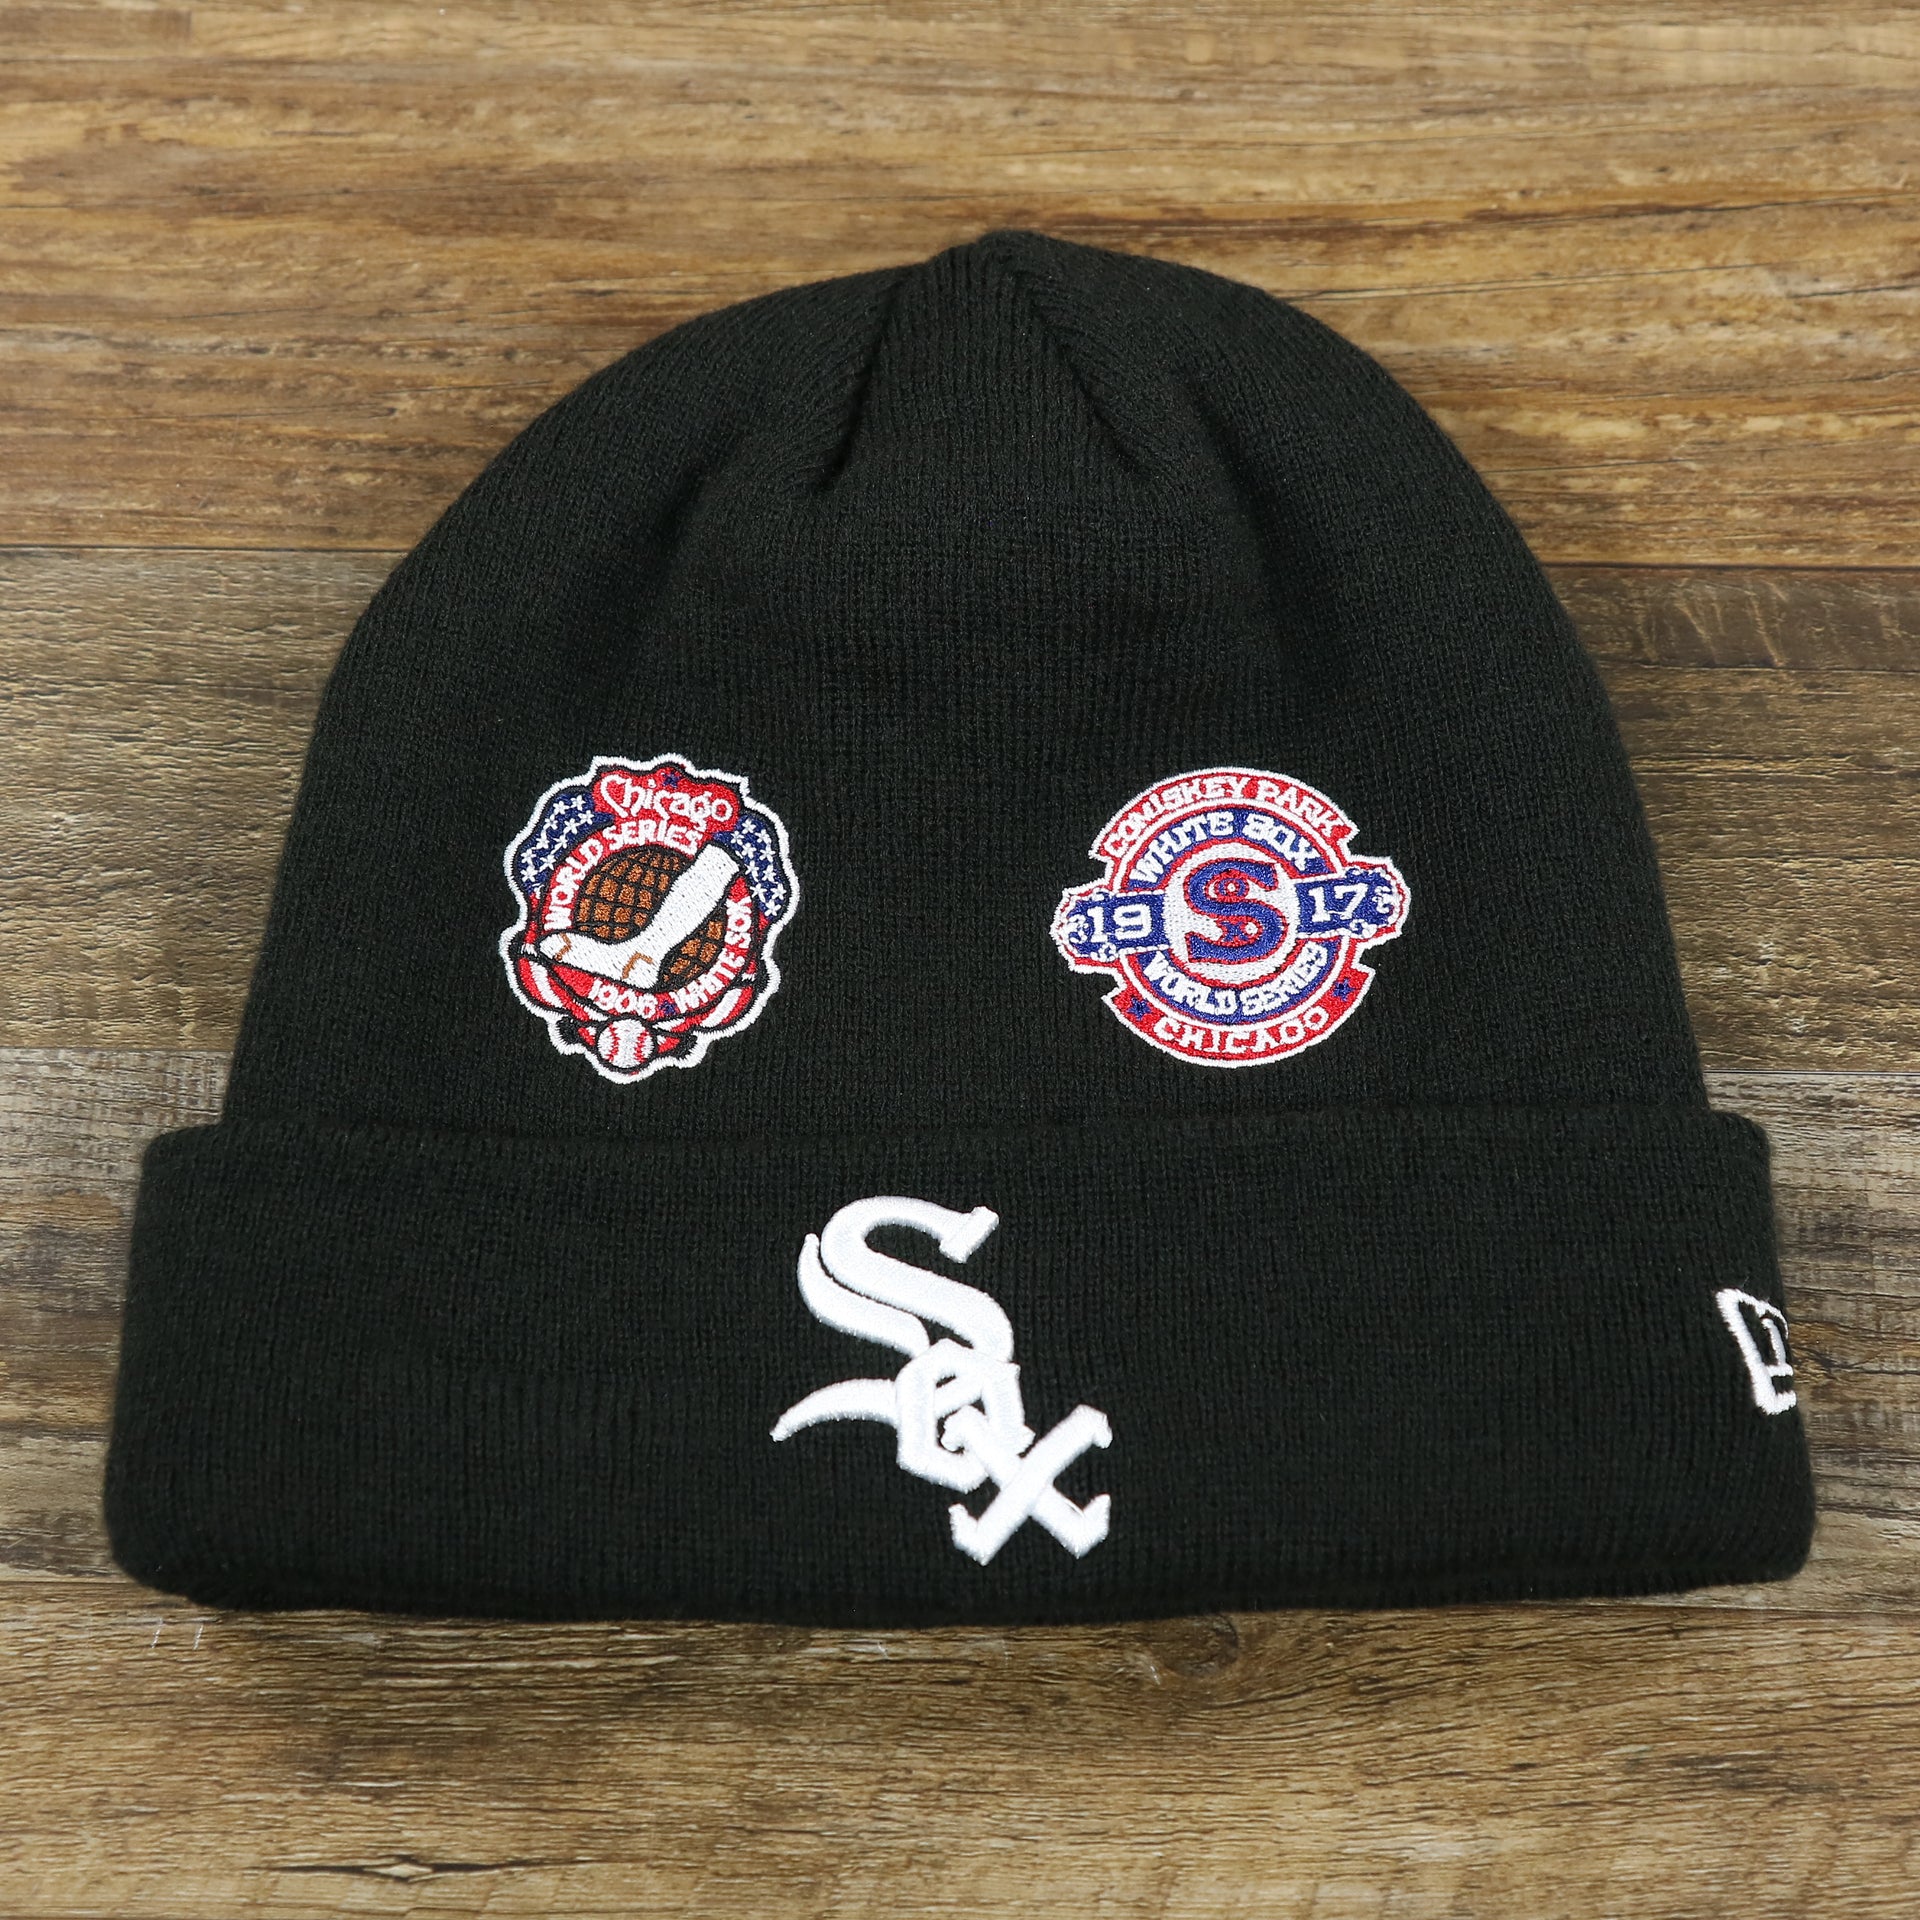 The front of the Chicago White Sox All Over World Series Side Patch 3x Champion Knit Cuff Beanie | New Era, Black